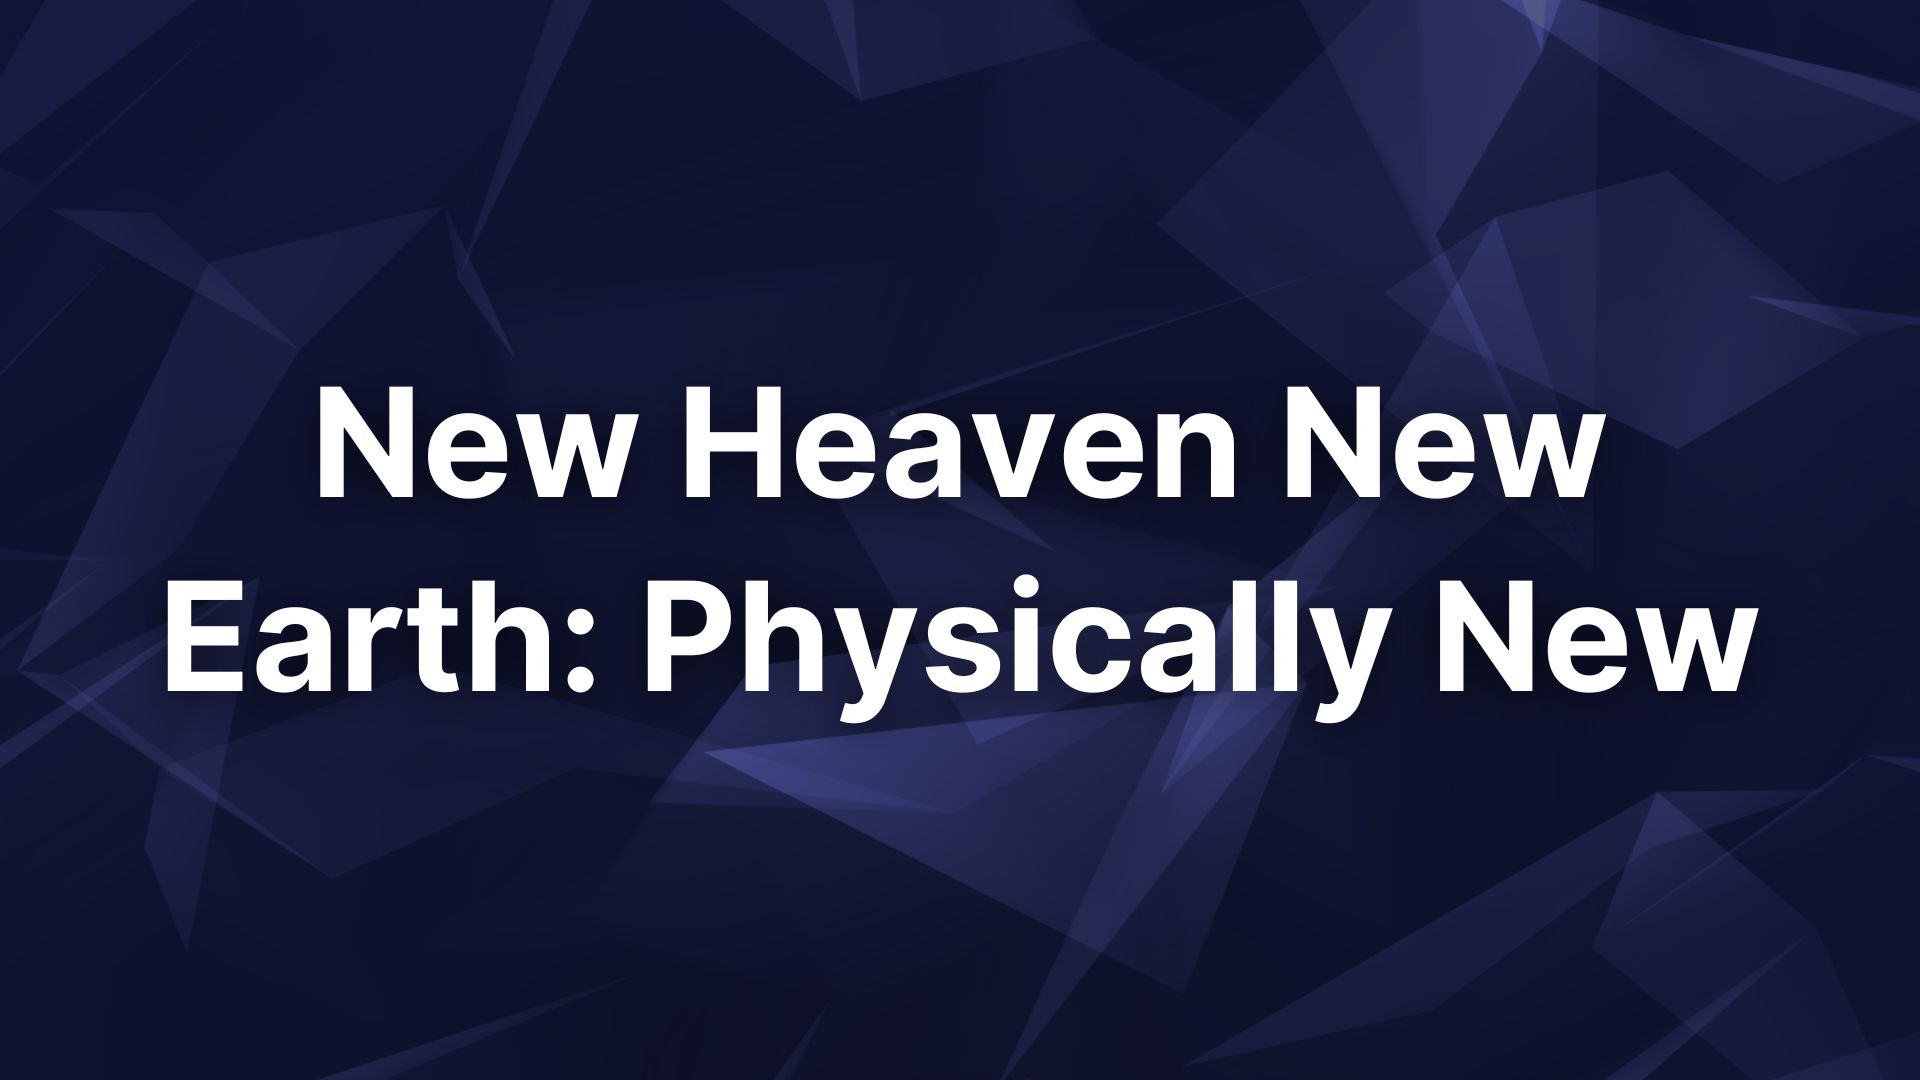 New Heaven New Earth: Physically New